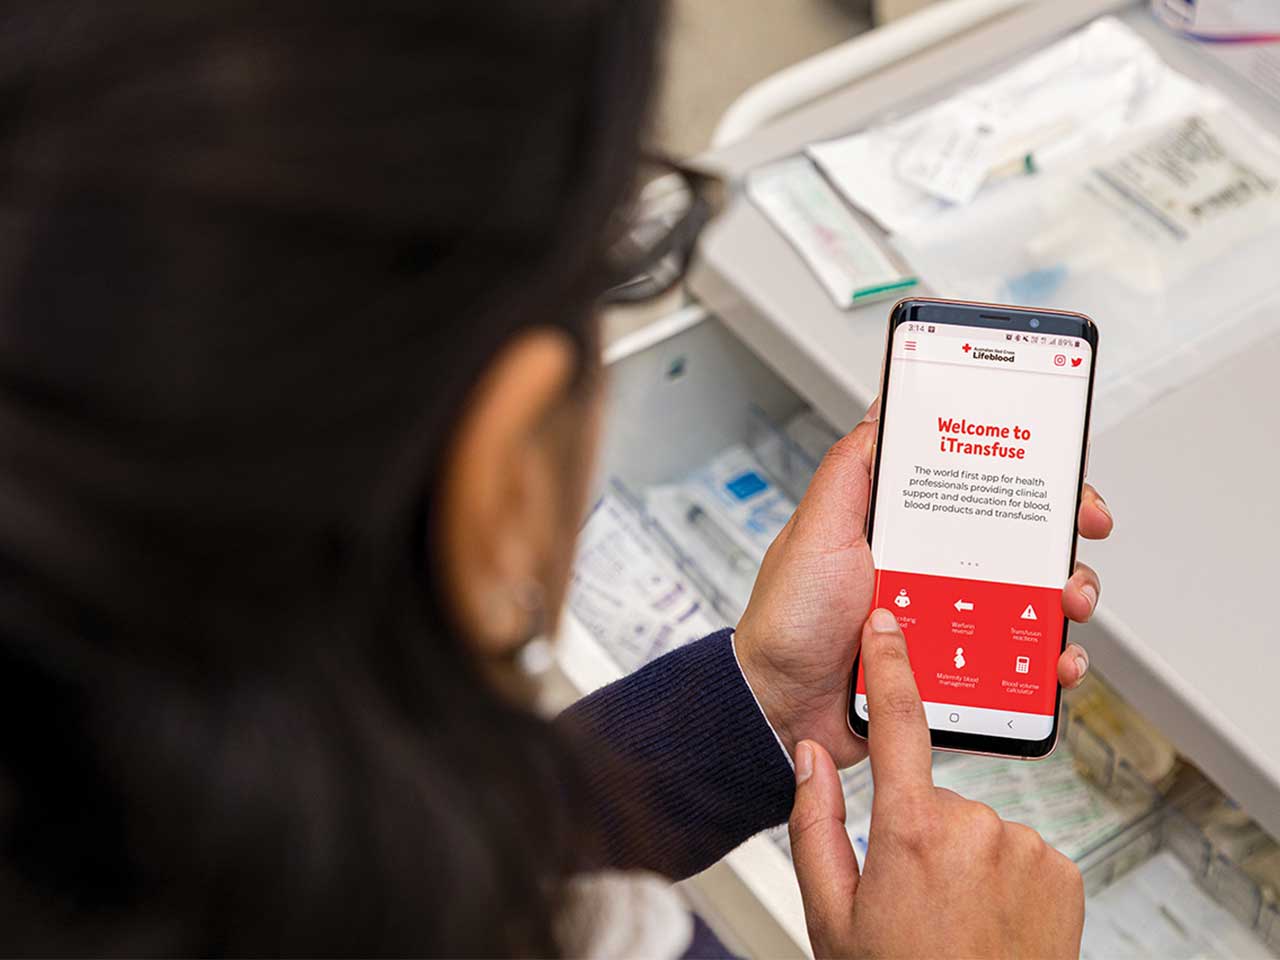 a doctor is using the itransfuse app on a smartphone